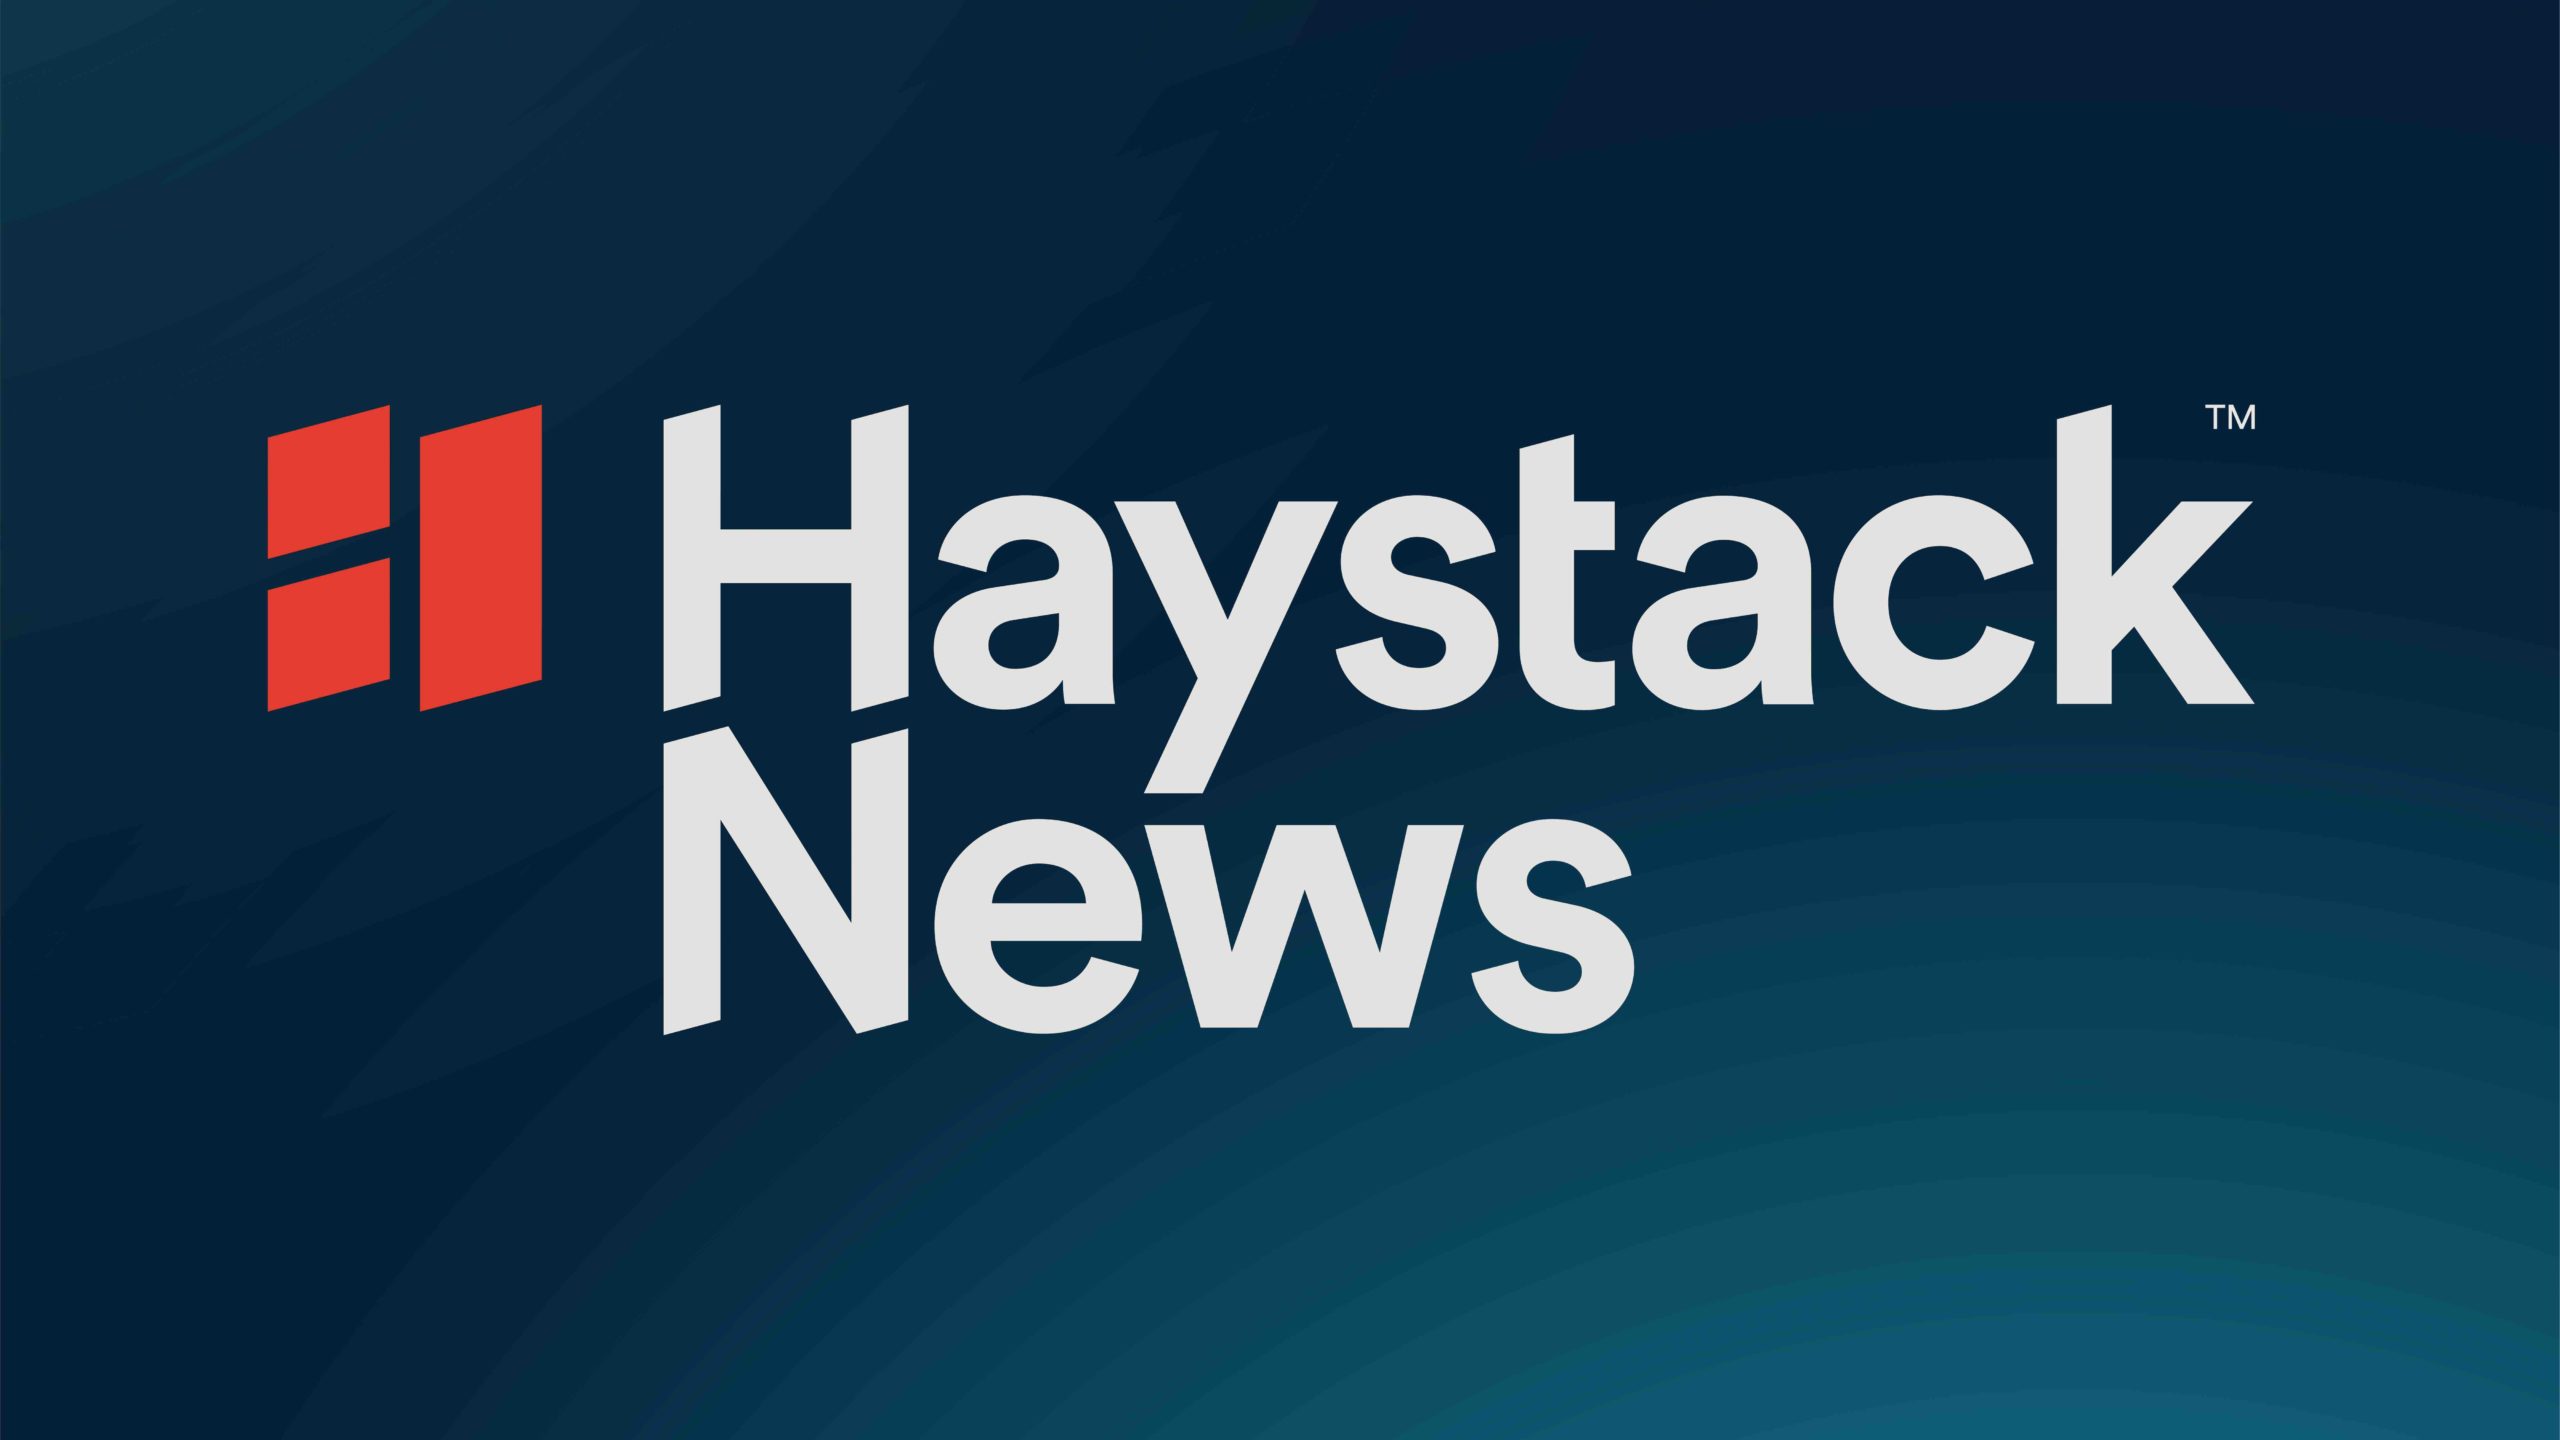 Haystack News is Adding More Free News Channels in May 2023